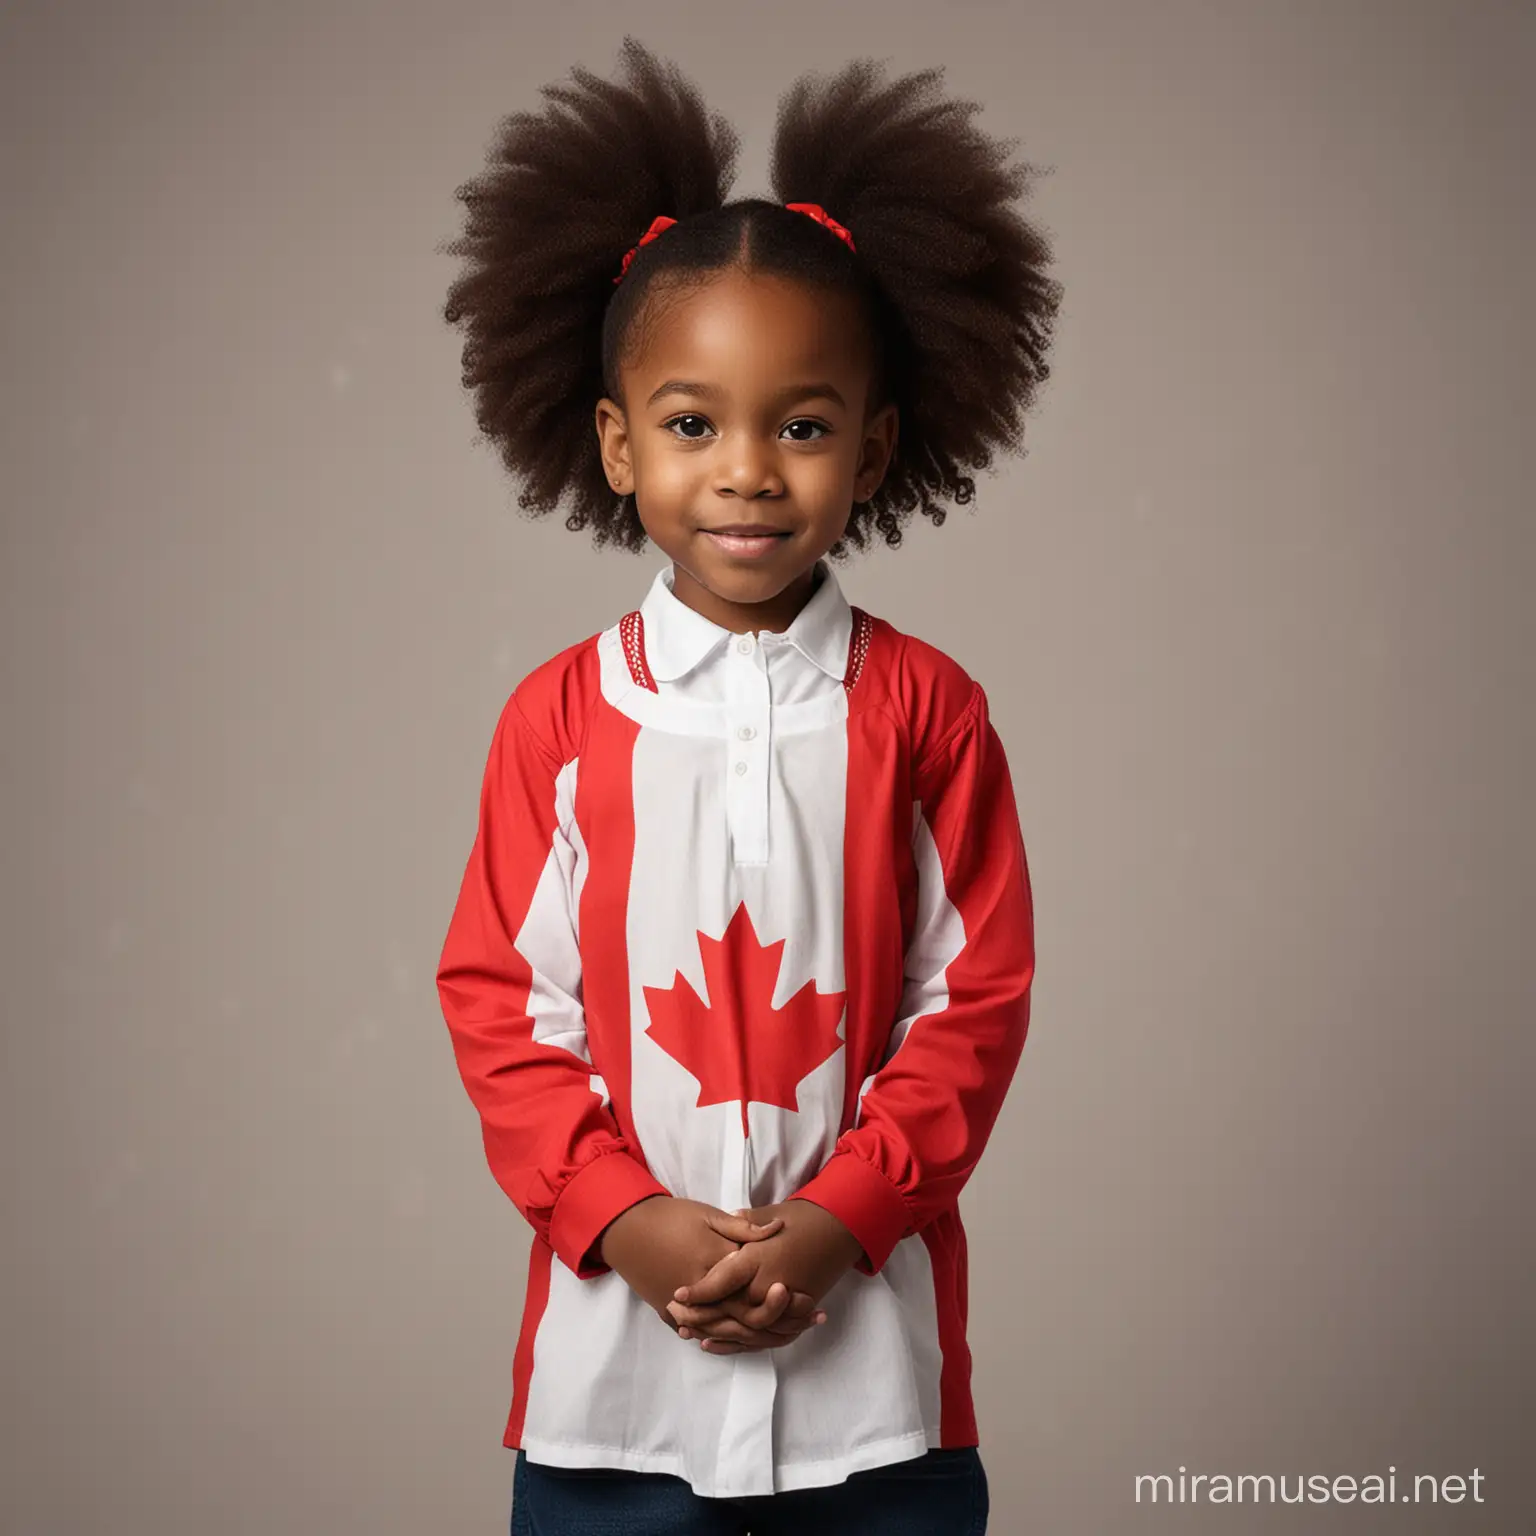 Young African Student Proudly Holding Canadian Flag